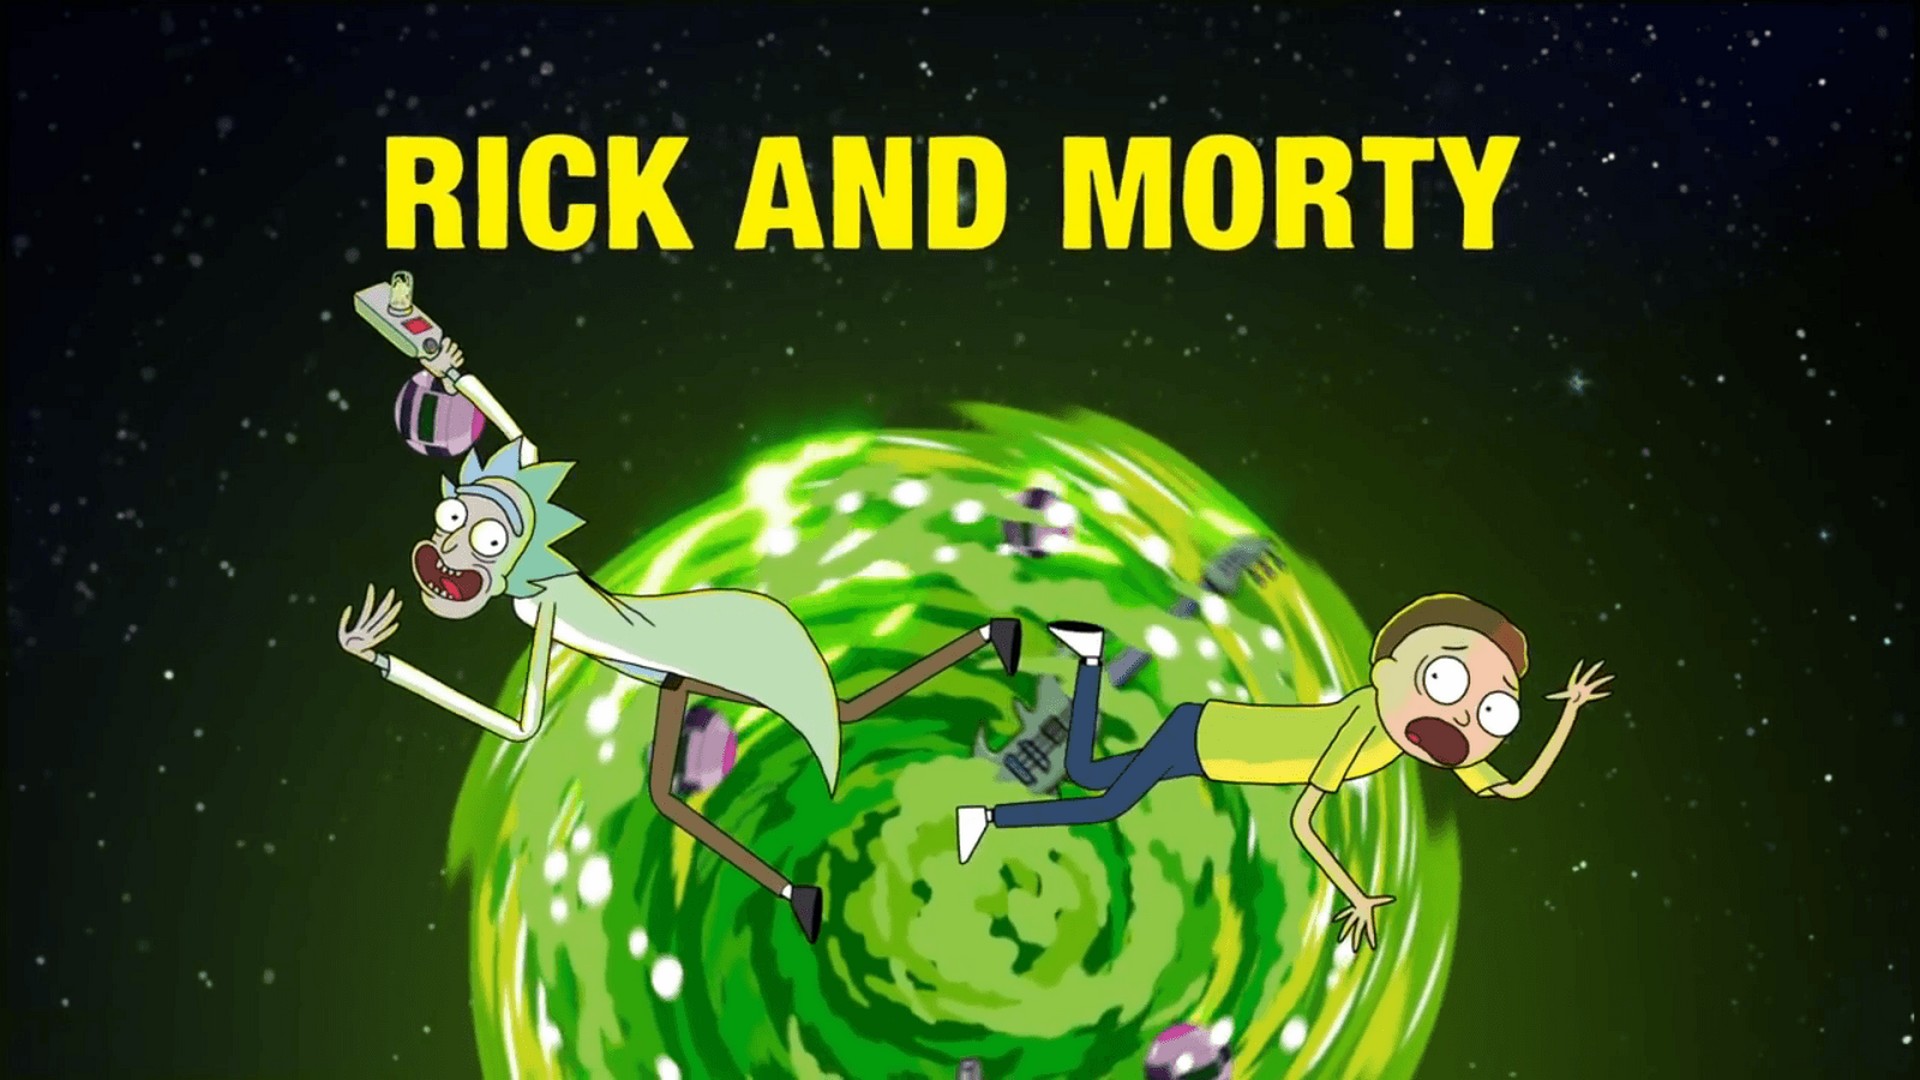 Computer Wallpapers Rick n Morty with image resolution 1920x1080 pixel. You can use this wallpaper as background for your desktop Computer Screensavers, Android or iPhone smartphones